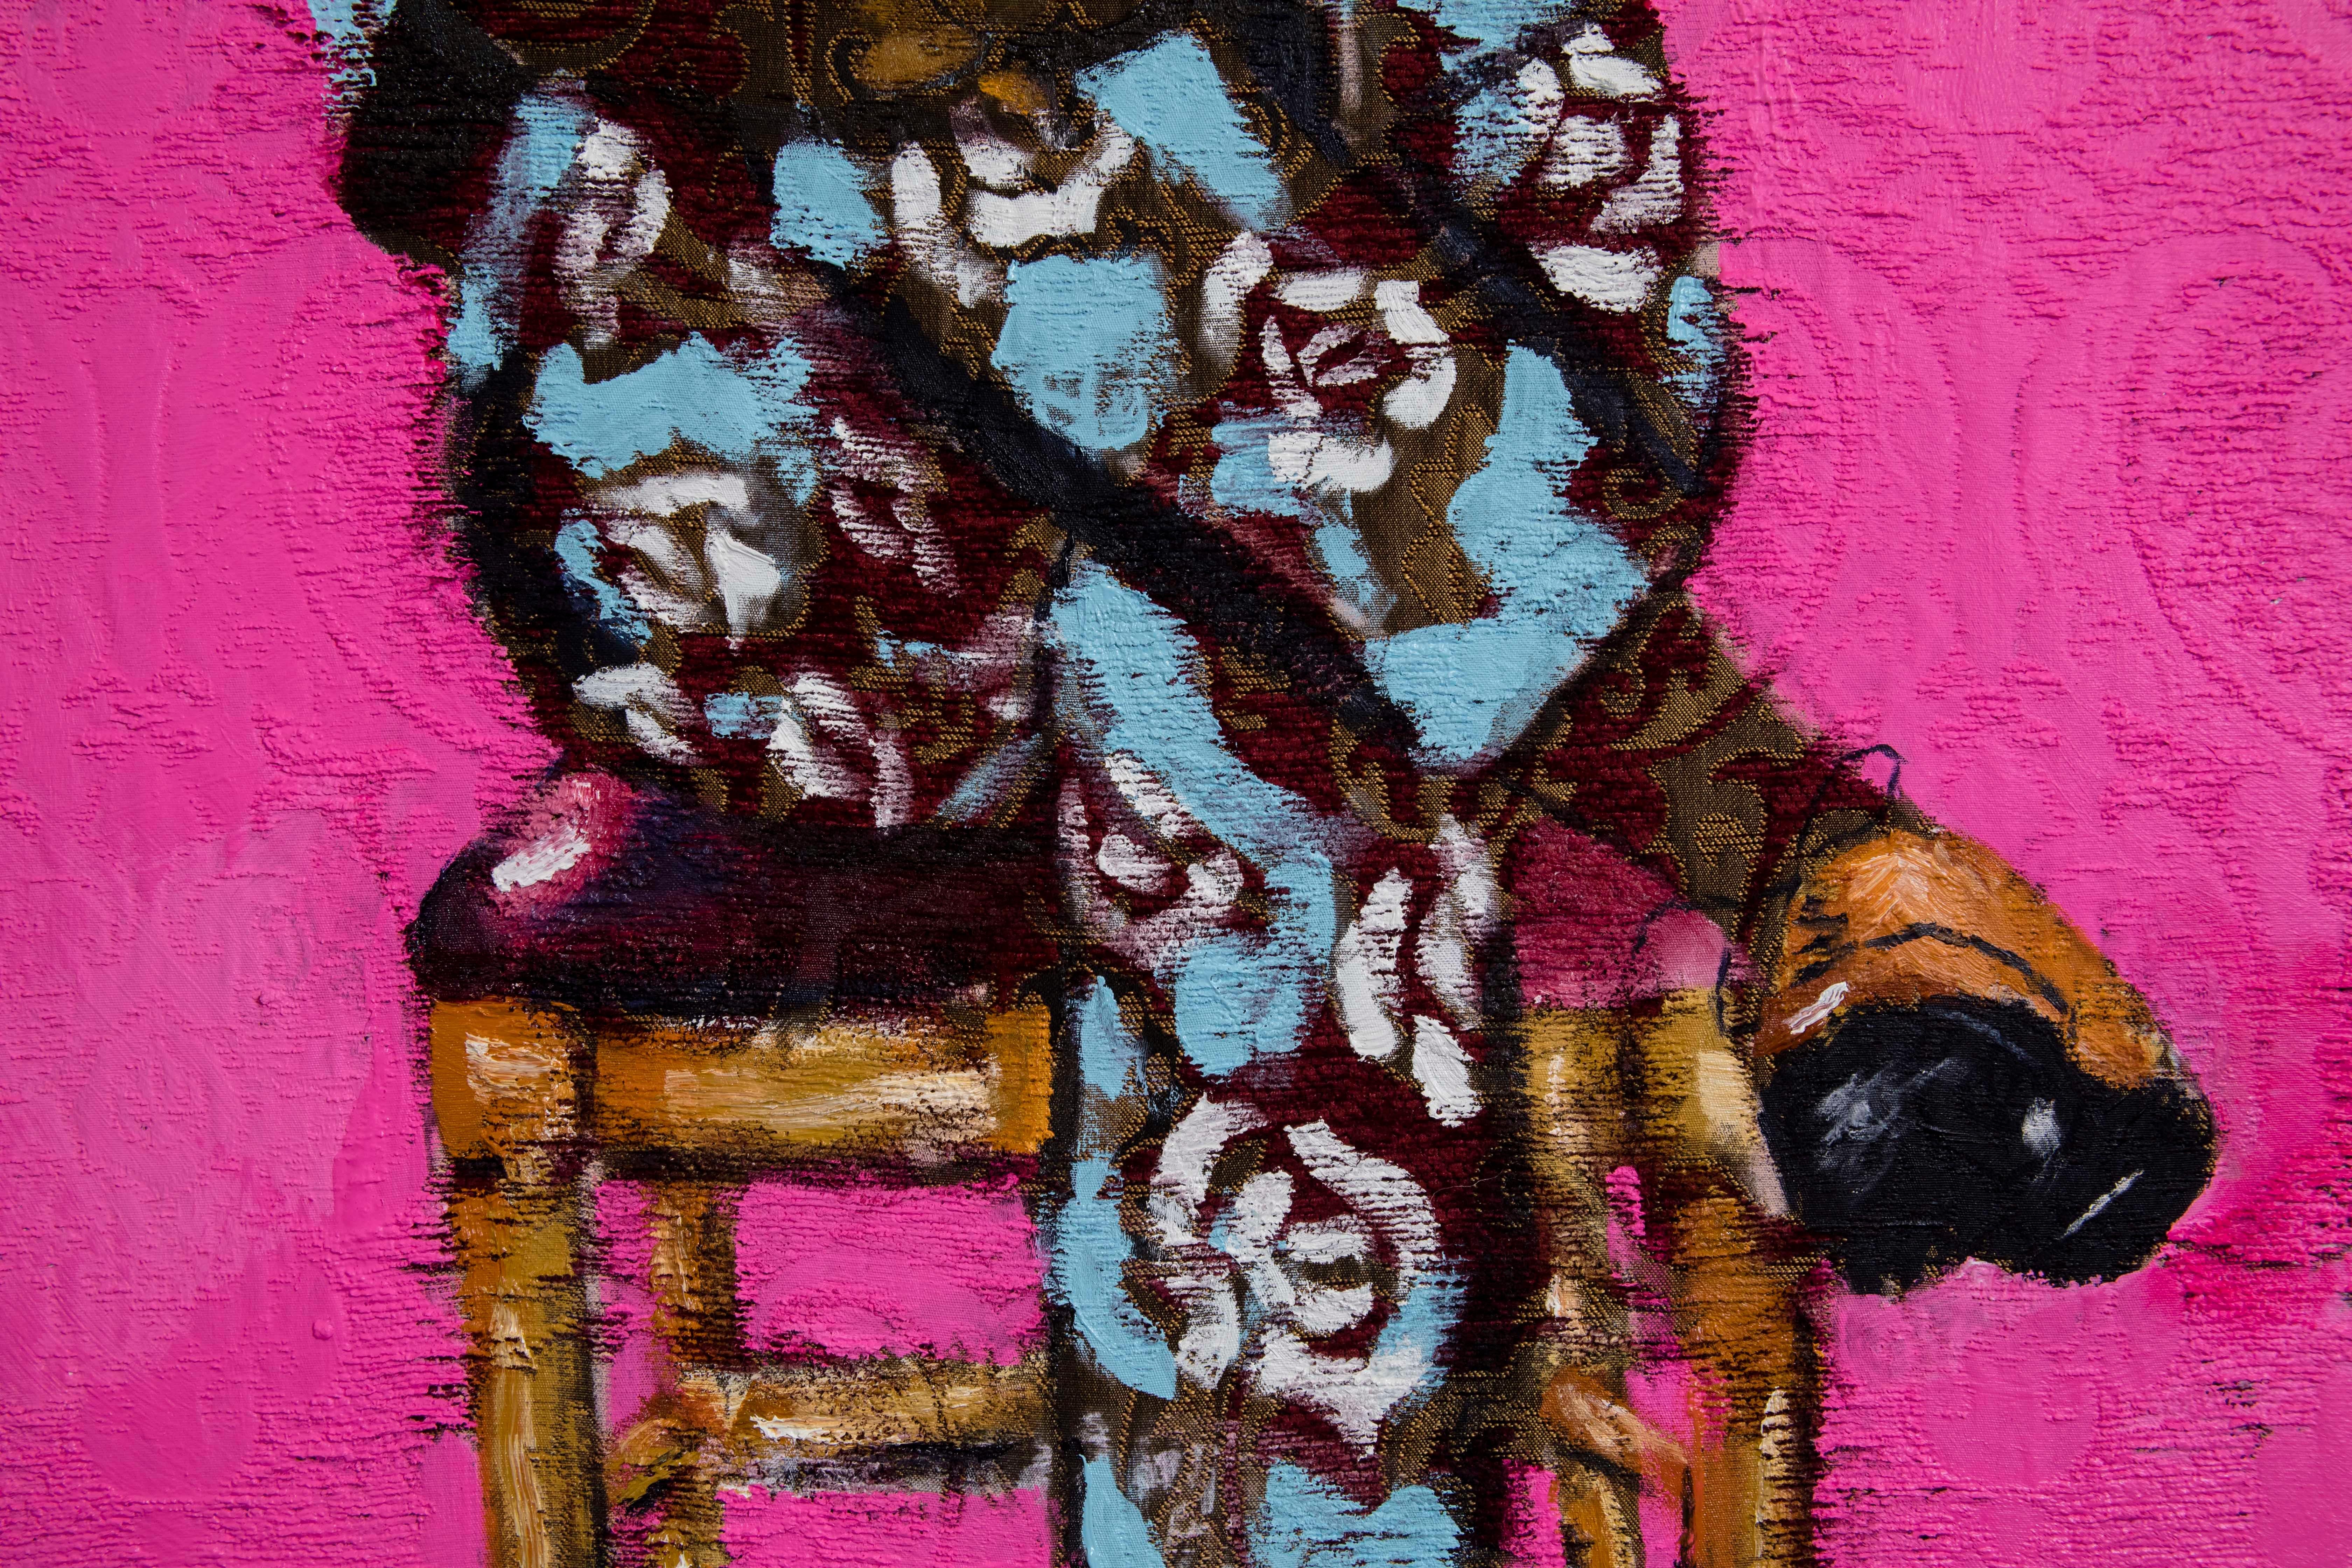 HIS FLOWERS - Portrait Painting on Fabric, Pink, Blue, Floral 4